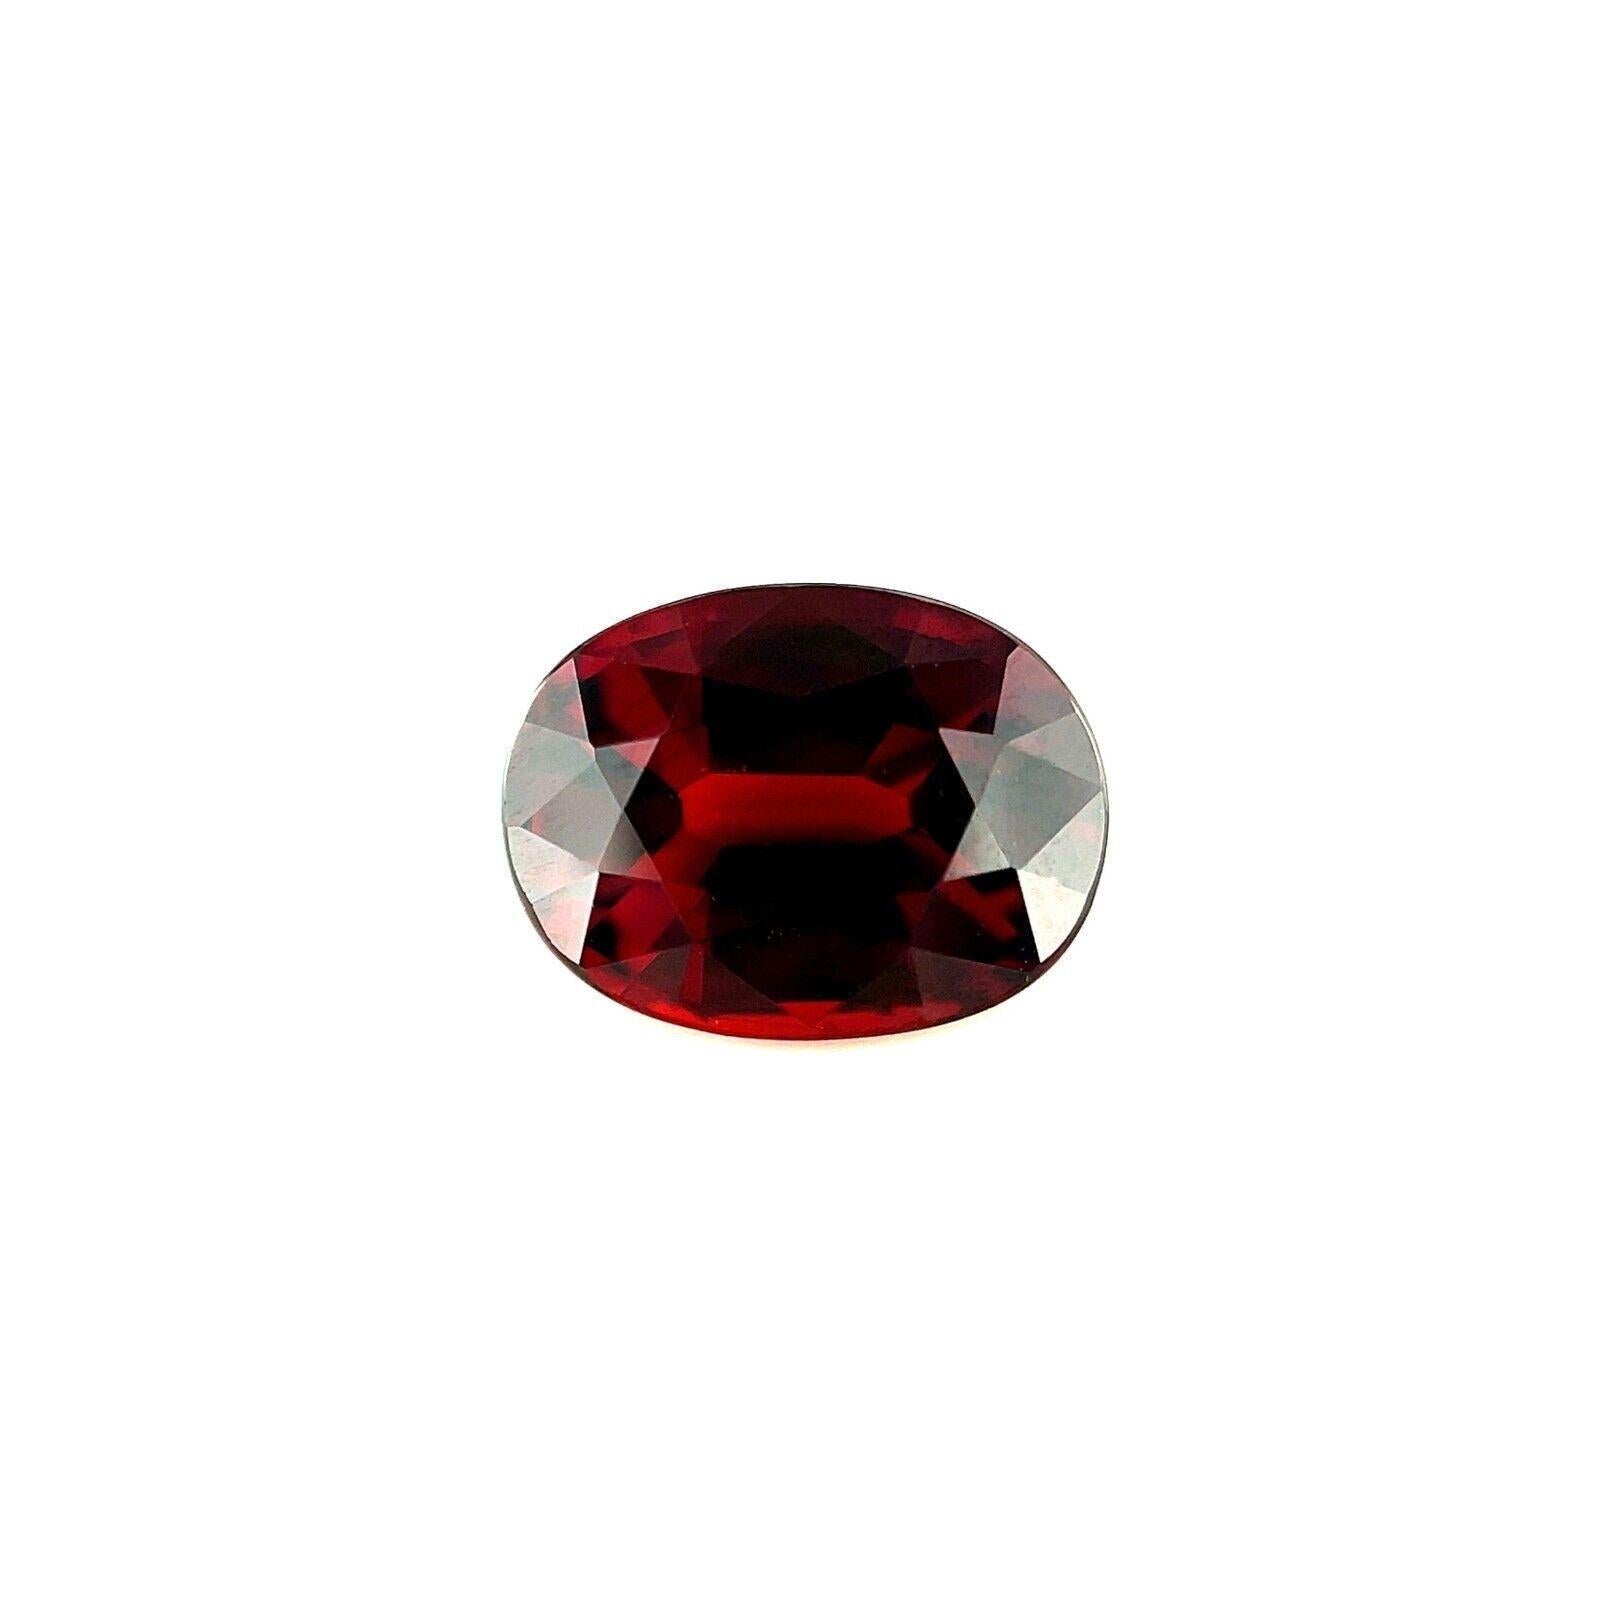 Fine 3.19ct Vivid Orange Red Spessartine Garnet IF Oval Cut Loose Gem 9.5x7.1mm

Fine Natural Spessartine Garnet Loose Gemstone.
3.19 Carat with a beautiful reddish orange colour and excellent clarity.  Very clean stone with only some small natural